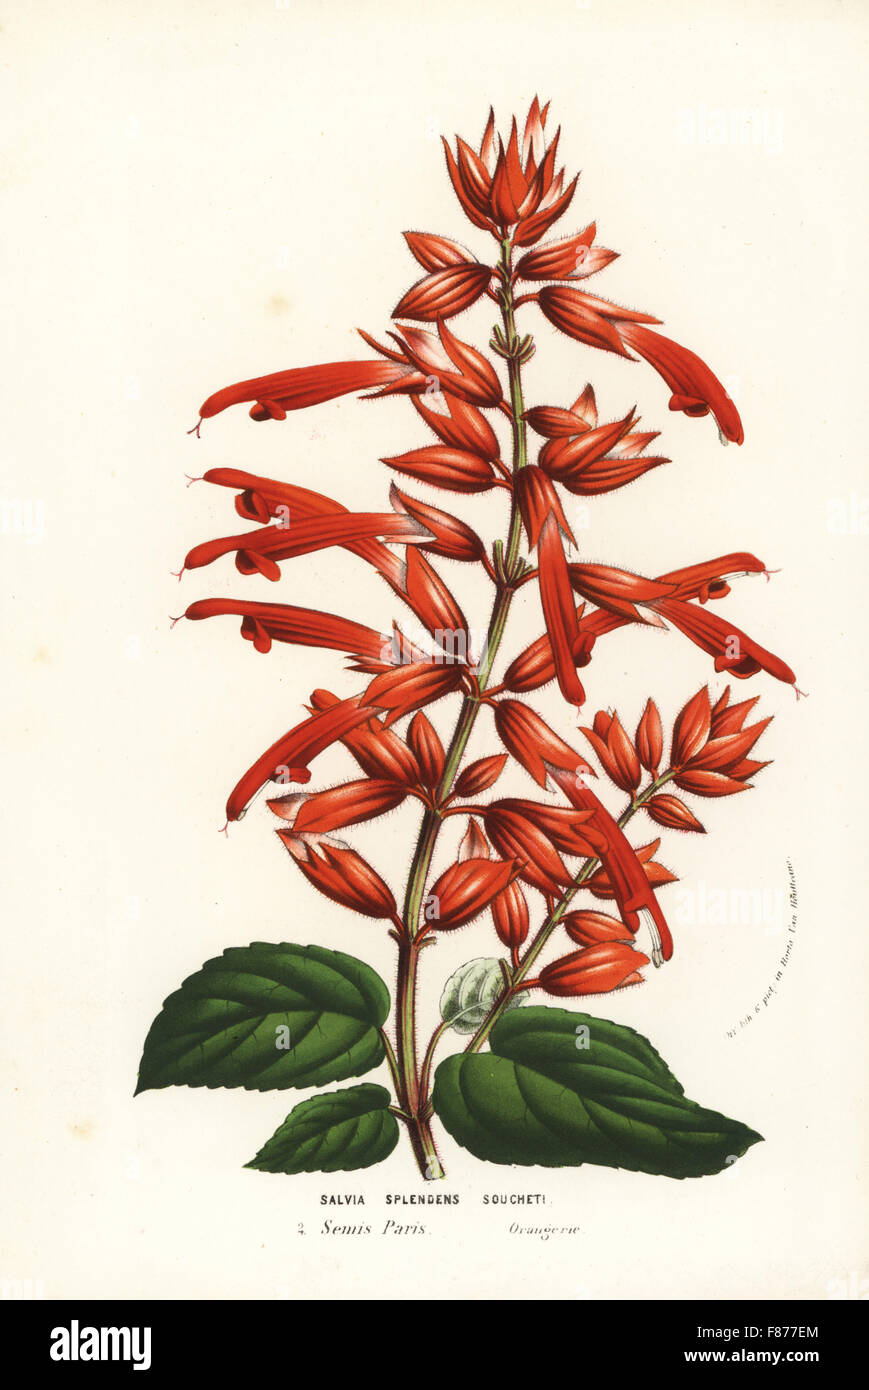 Scarlet sage cultivar, Salvia splendens souchetii. Handcoloured lithograph from Louis van Houtte and Charles Lemaire's Flowers of the Gardens and Hothouses of Europe, Flore des Serres et des Jardins de l'Europe, Ghent, Belgium, 1856. Stock Photo